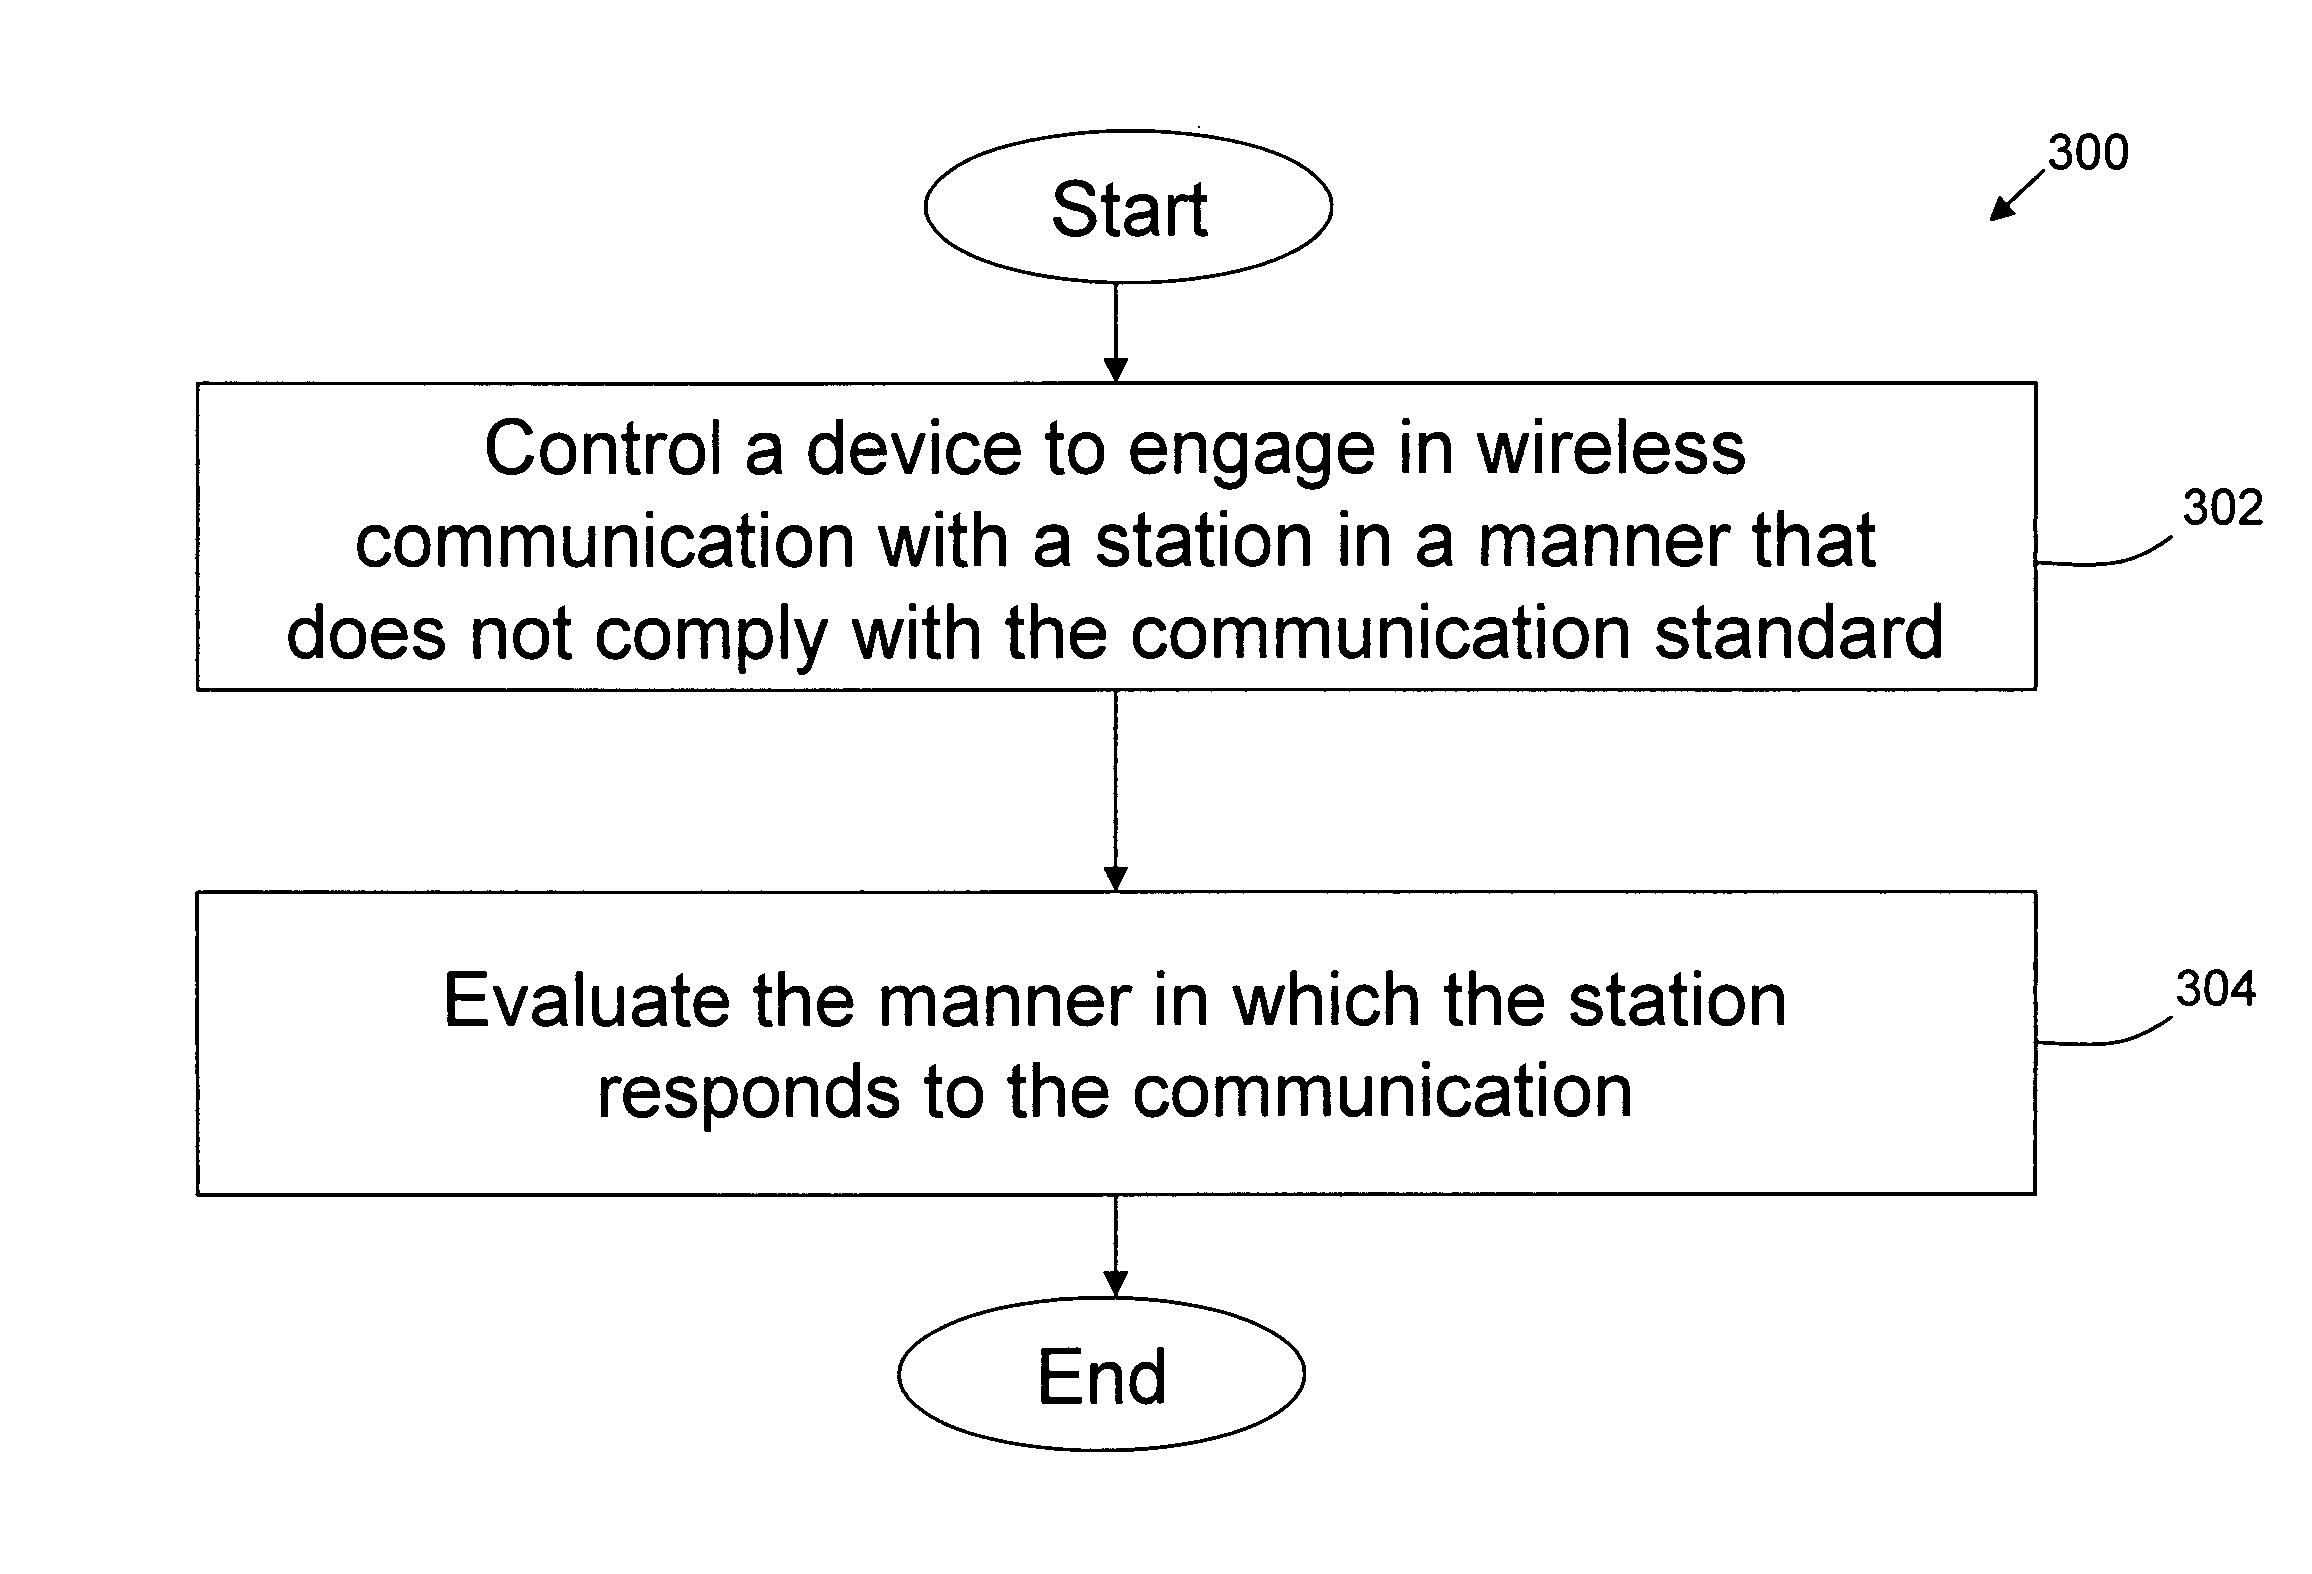 Testing a station's response to non-compliant wireless communication